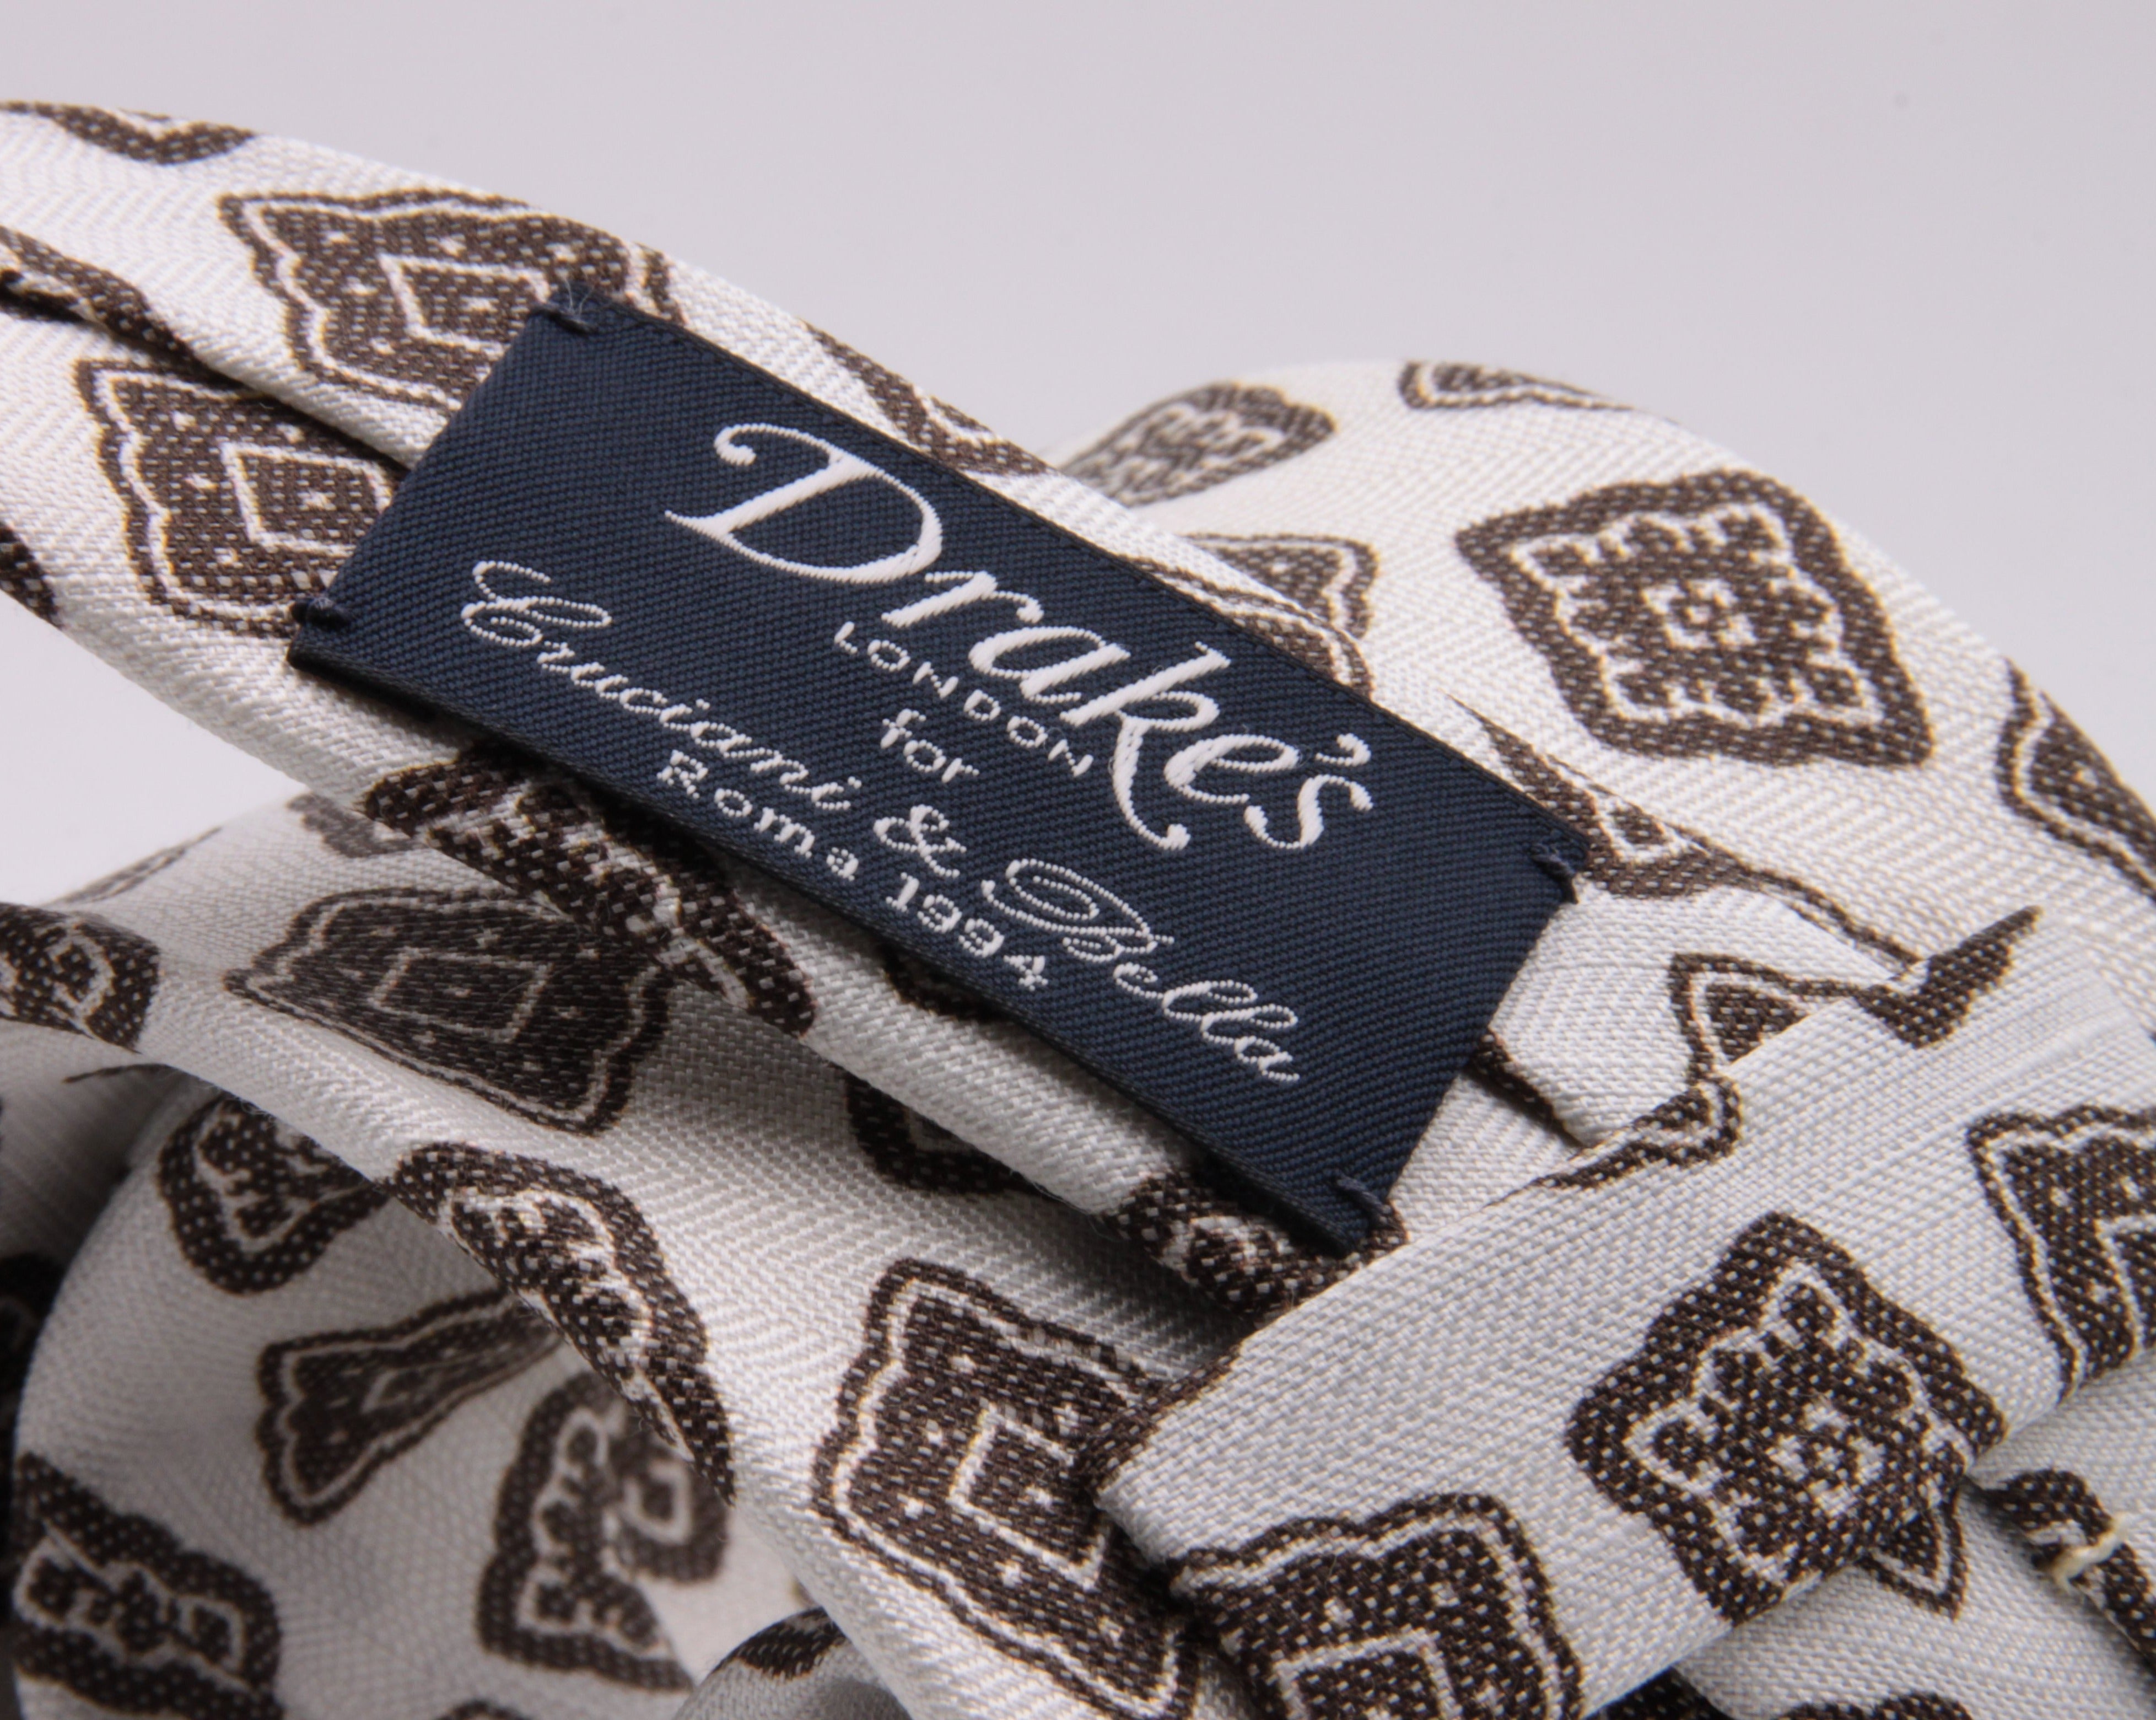 Drake's for Cruciani e Bella Printed 60% Silk 40% Linen Self-Tipped White and Brown Medallion Tie Handmade in London, England 8 cm x 149 cm #5425